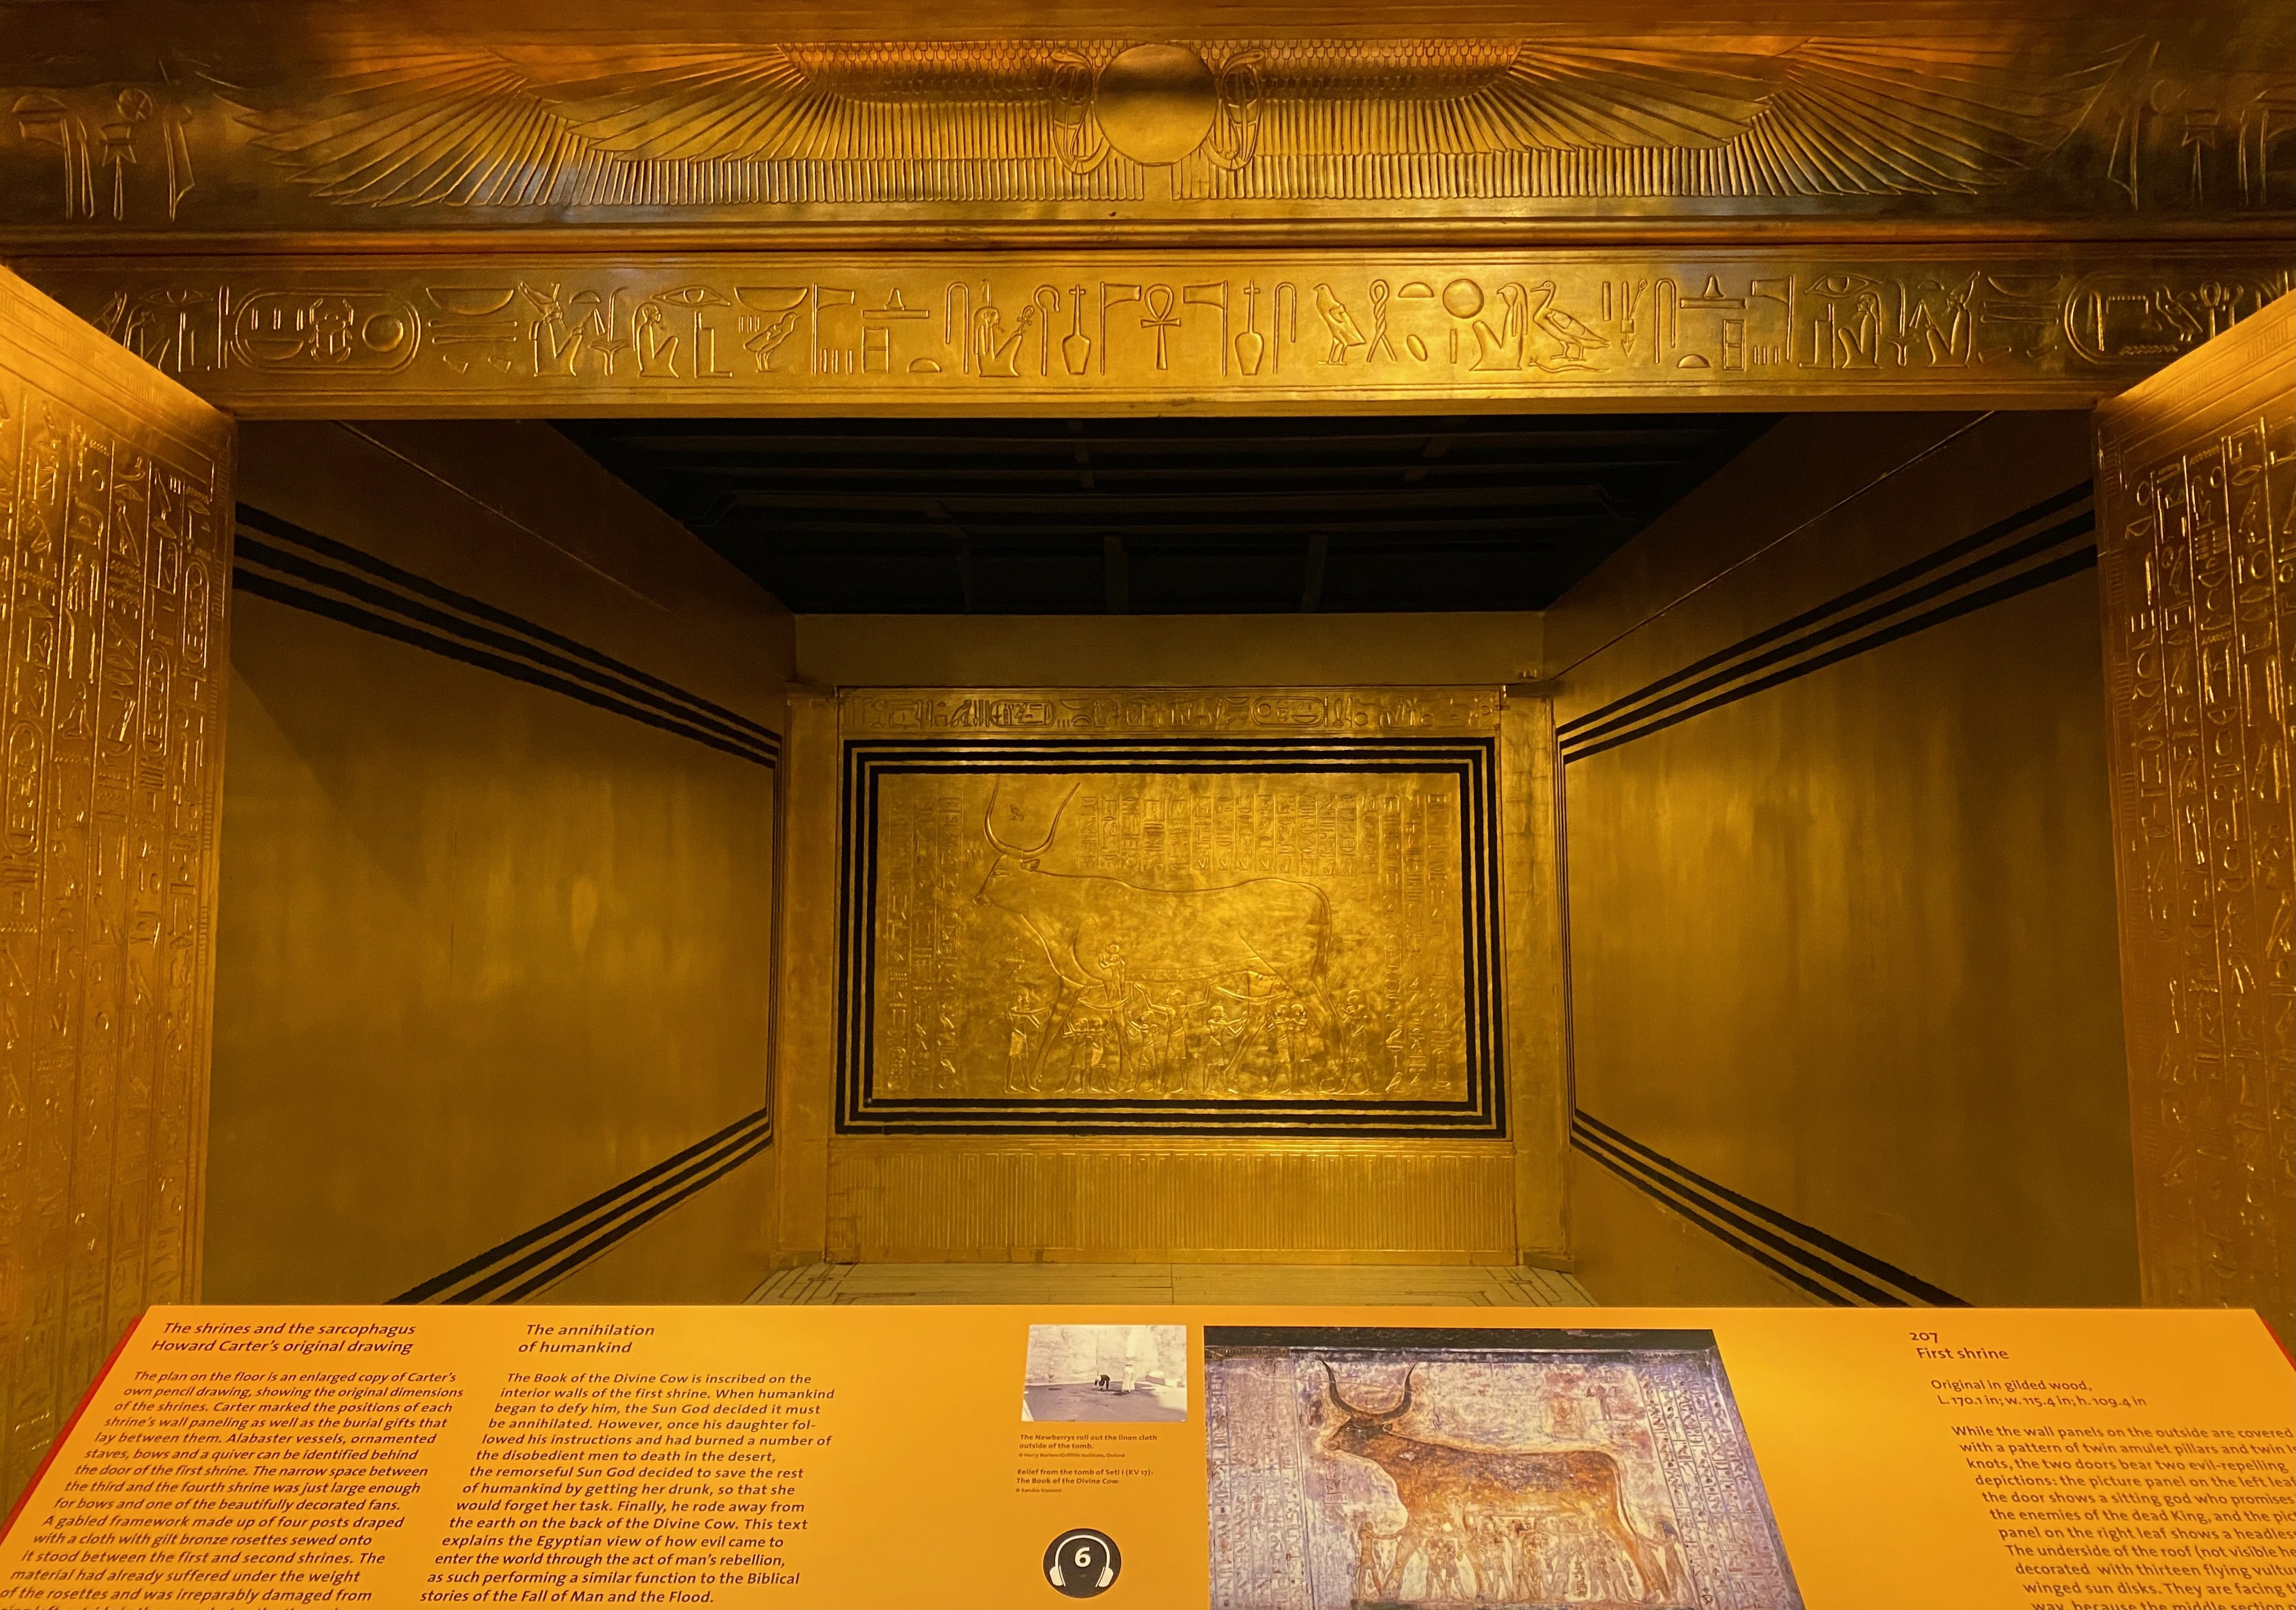 A recreation of Tutankhamun's first shrine, with fully gold-gilded walls